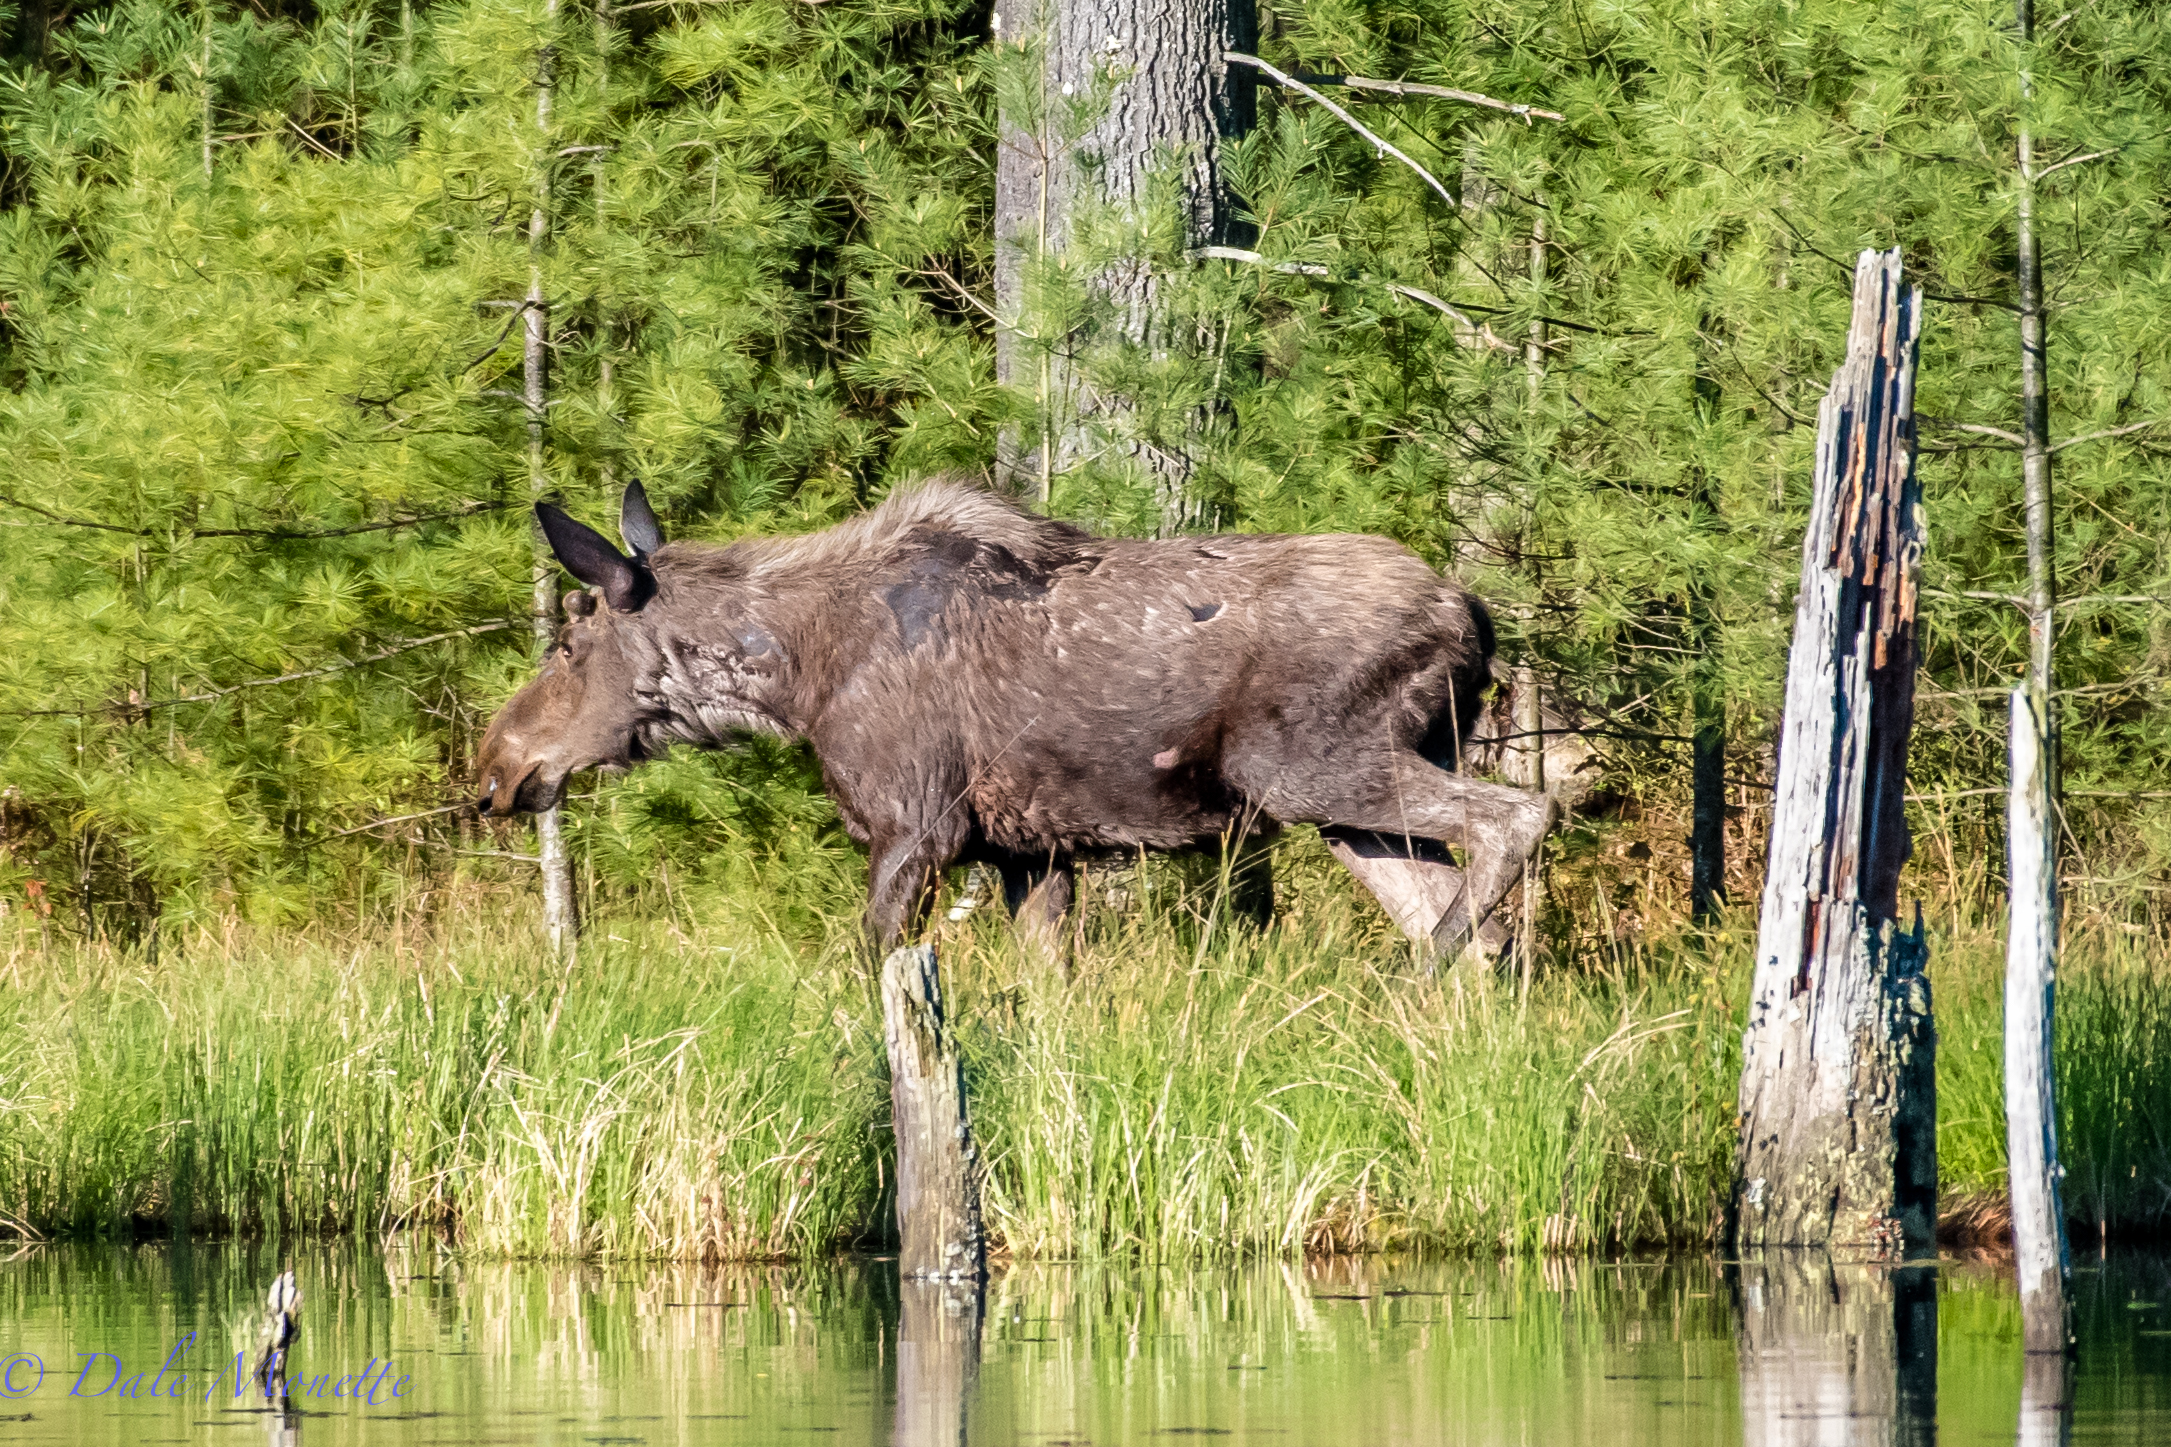    well well !!   &nbsp;  Look who tromped right through the other side on my swamp today !!...... A young bull moose looking pretty ratty while shedding his winter coat. You can see his new antlers already starting. He didnt hang around long..... 5/